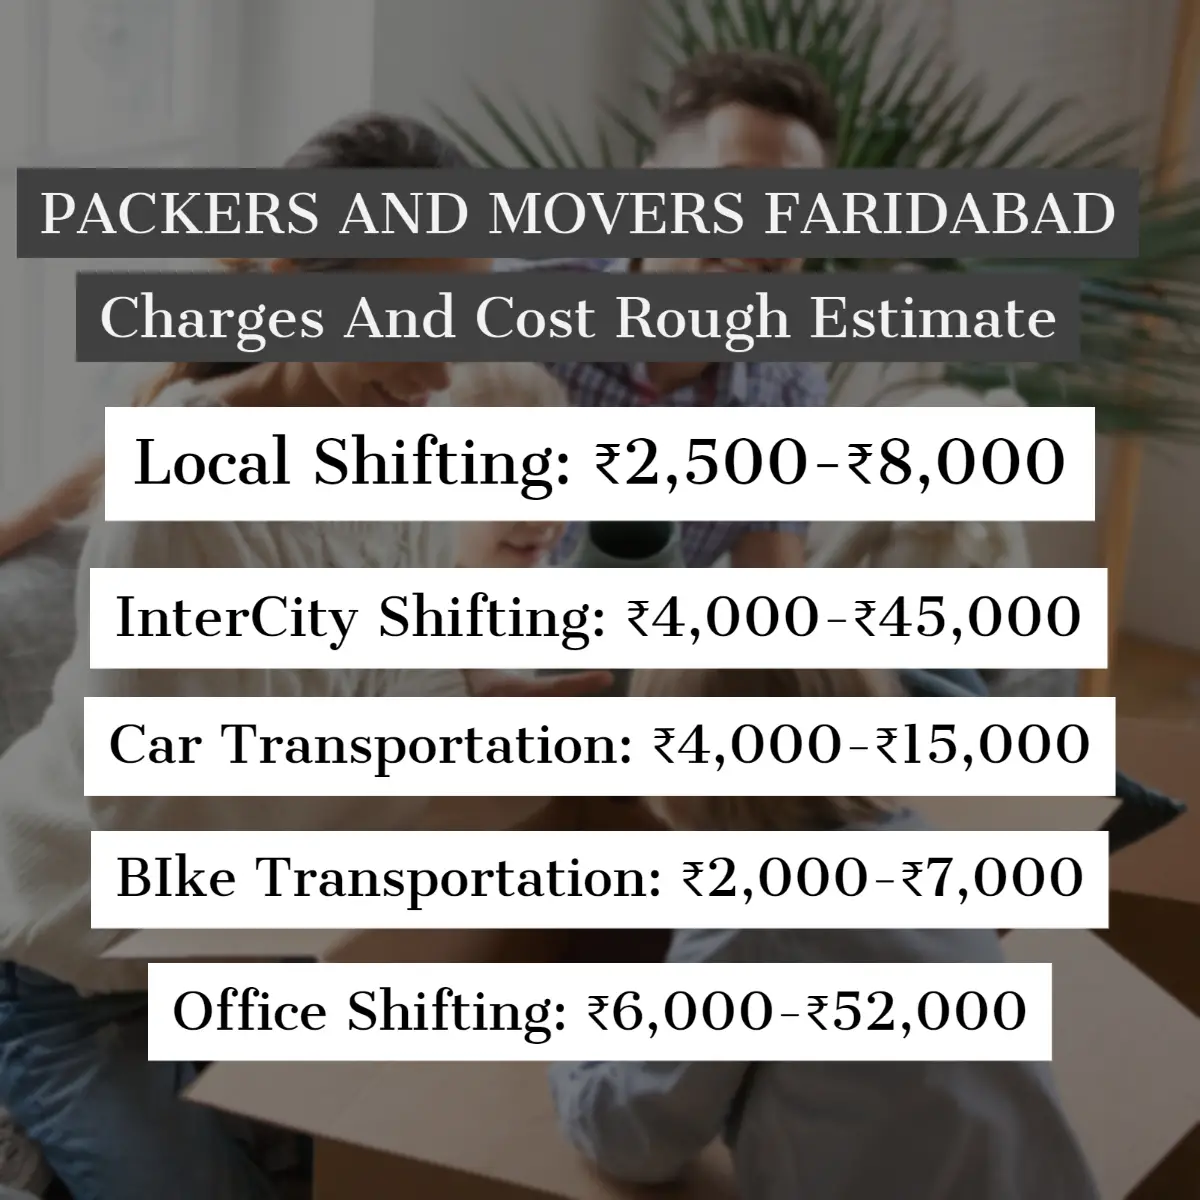 Packers and Movers Faridabad Charges